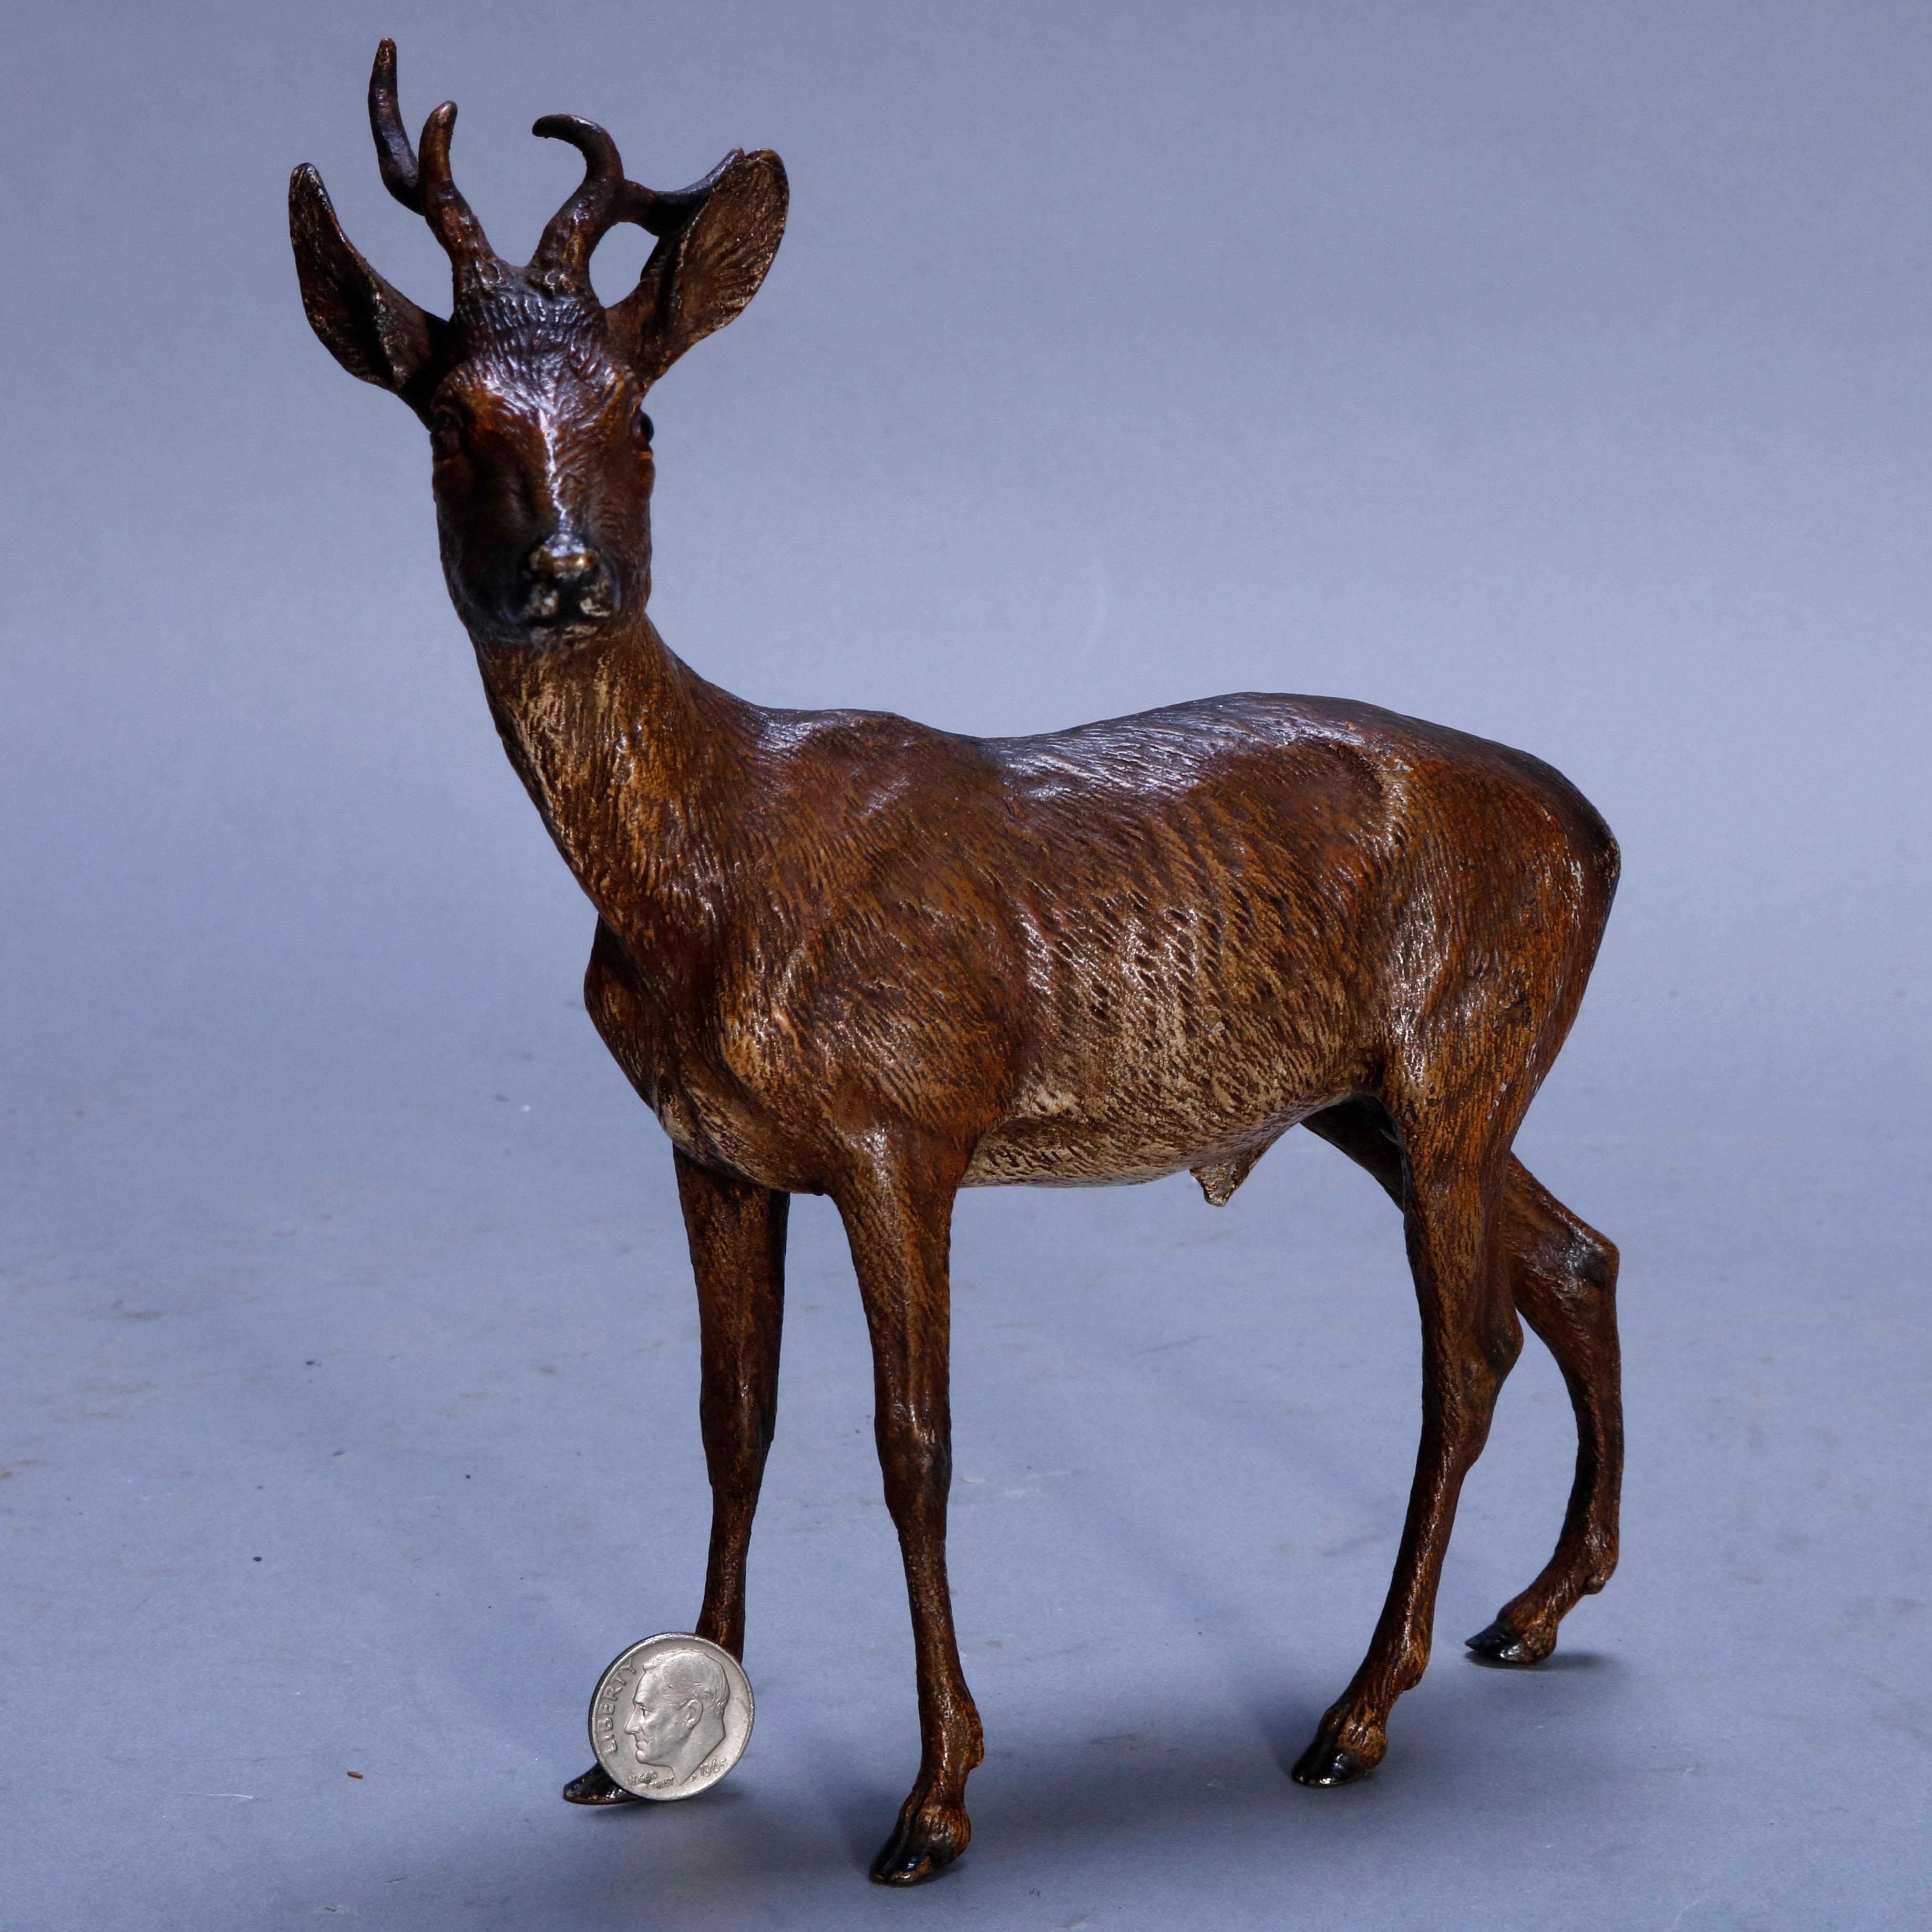 An antique and large Vienna Austrian cold painted bronze figure in the manner of Franz Bergmann depicts stag, buck or antlered deer, circa 1850.

Measures: 7